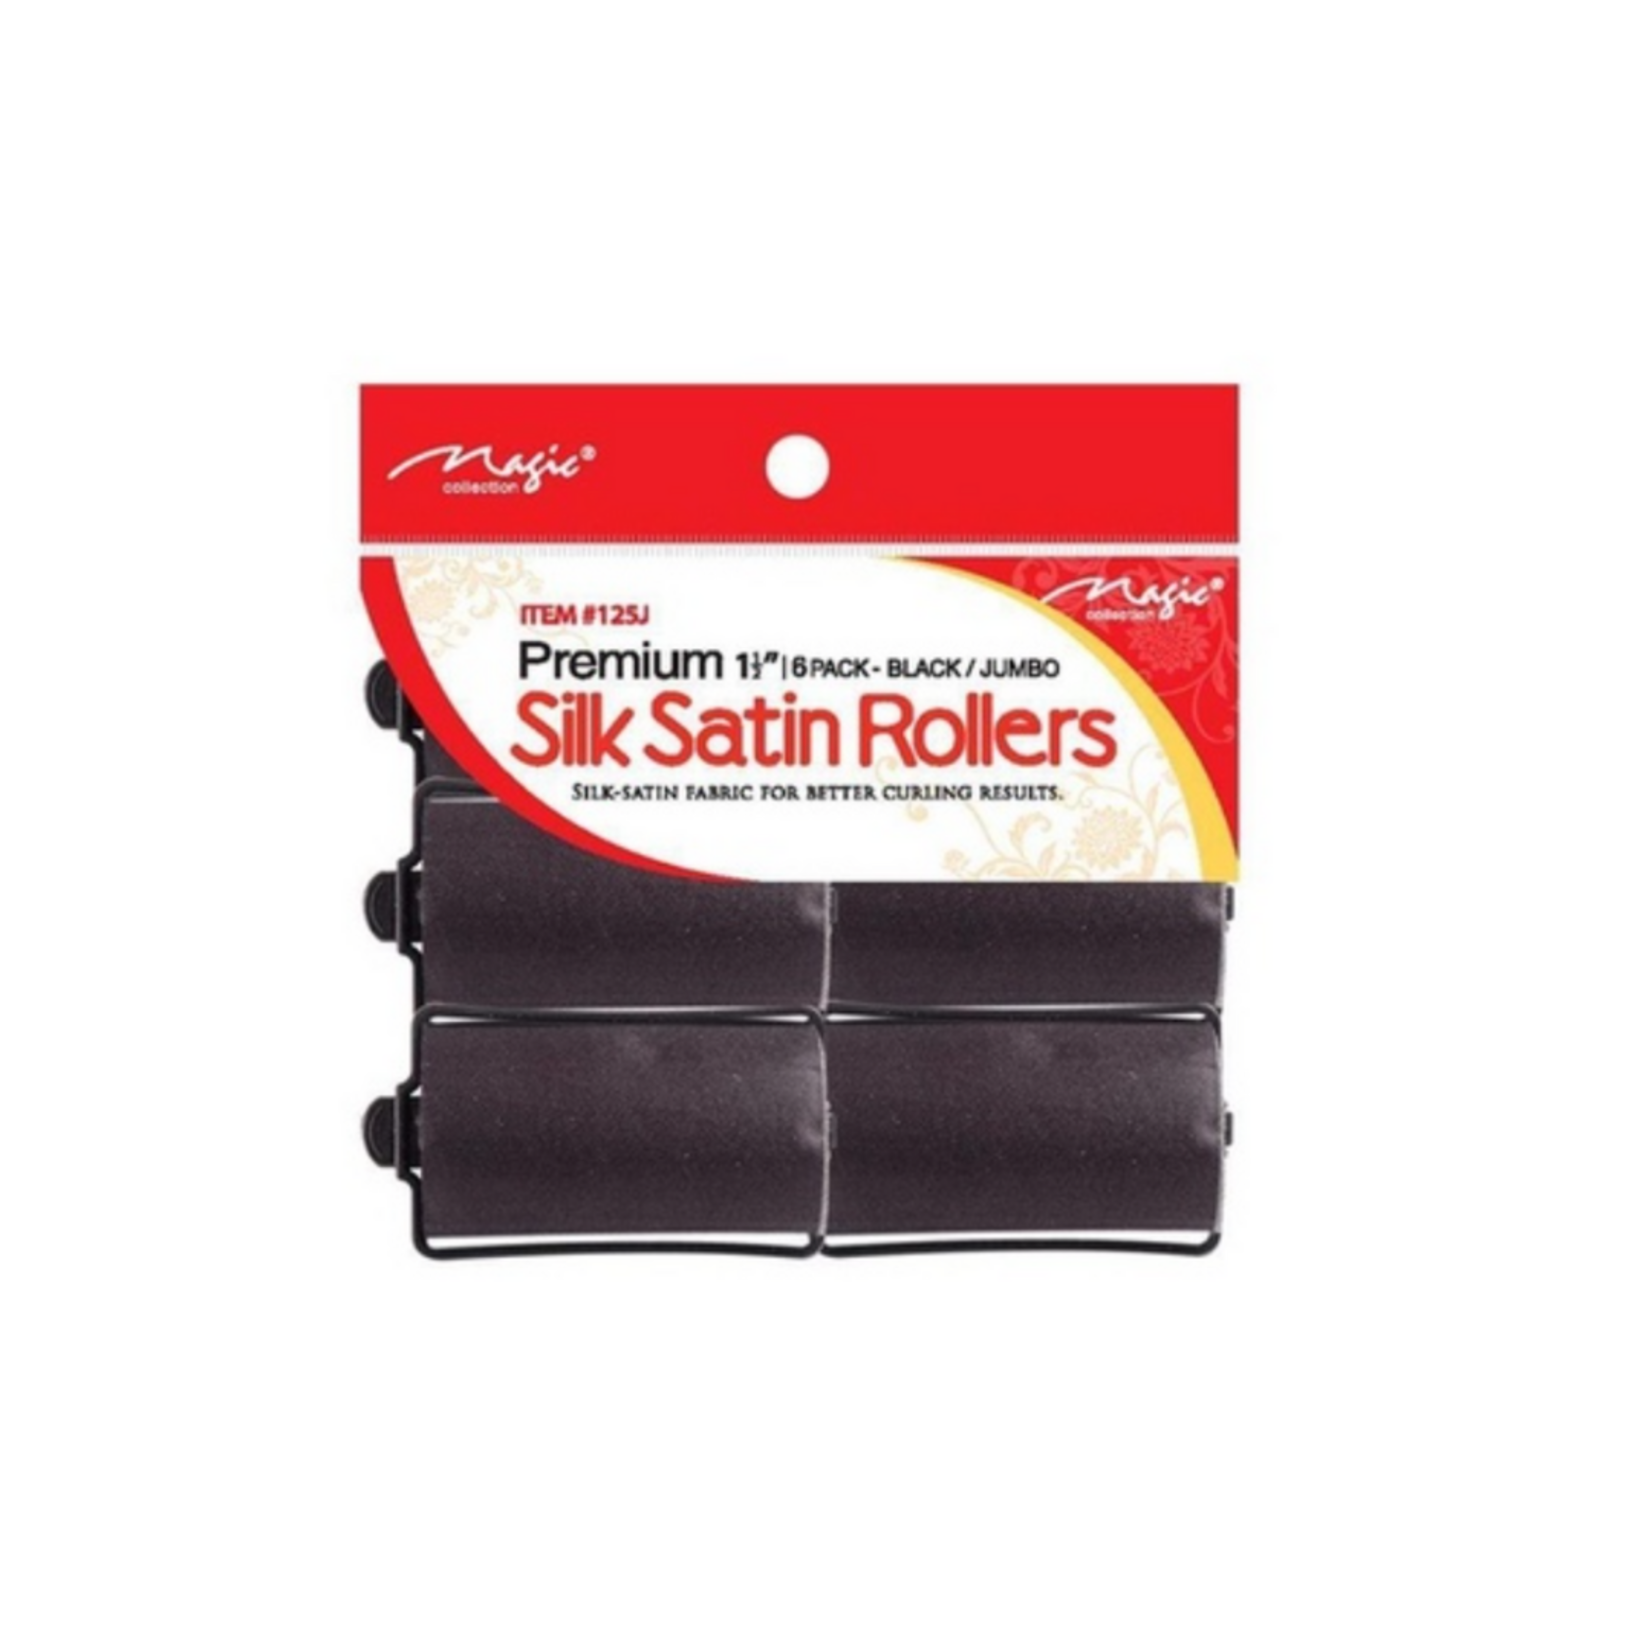 Magic collection silk satin rollers